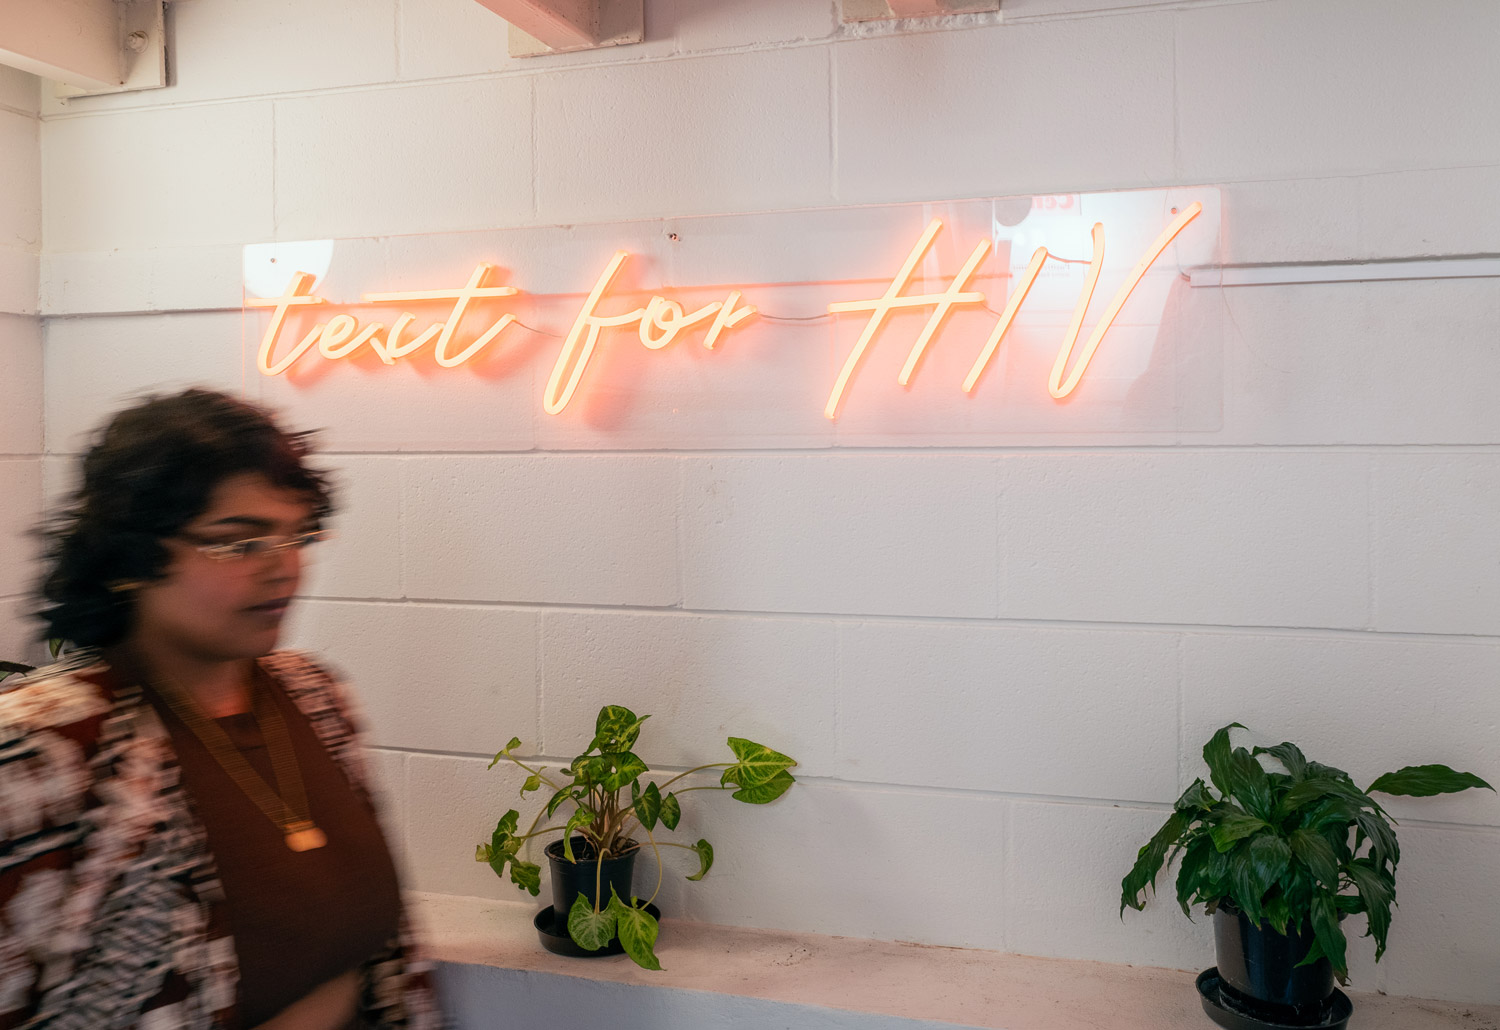 Photo of someone walking past a neon sign with the words "test for HIV"